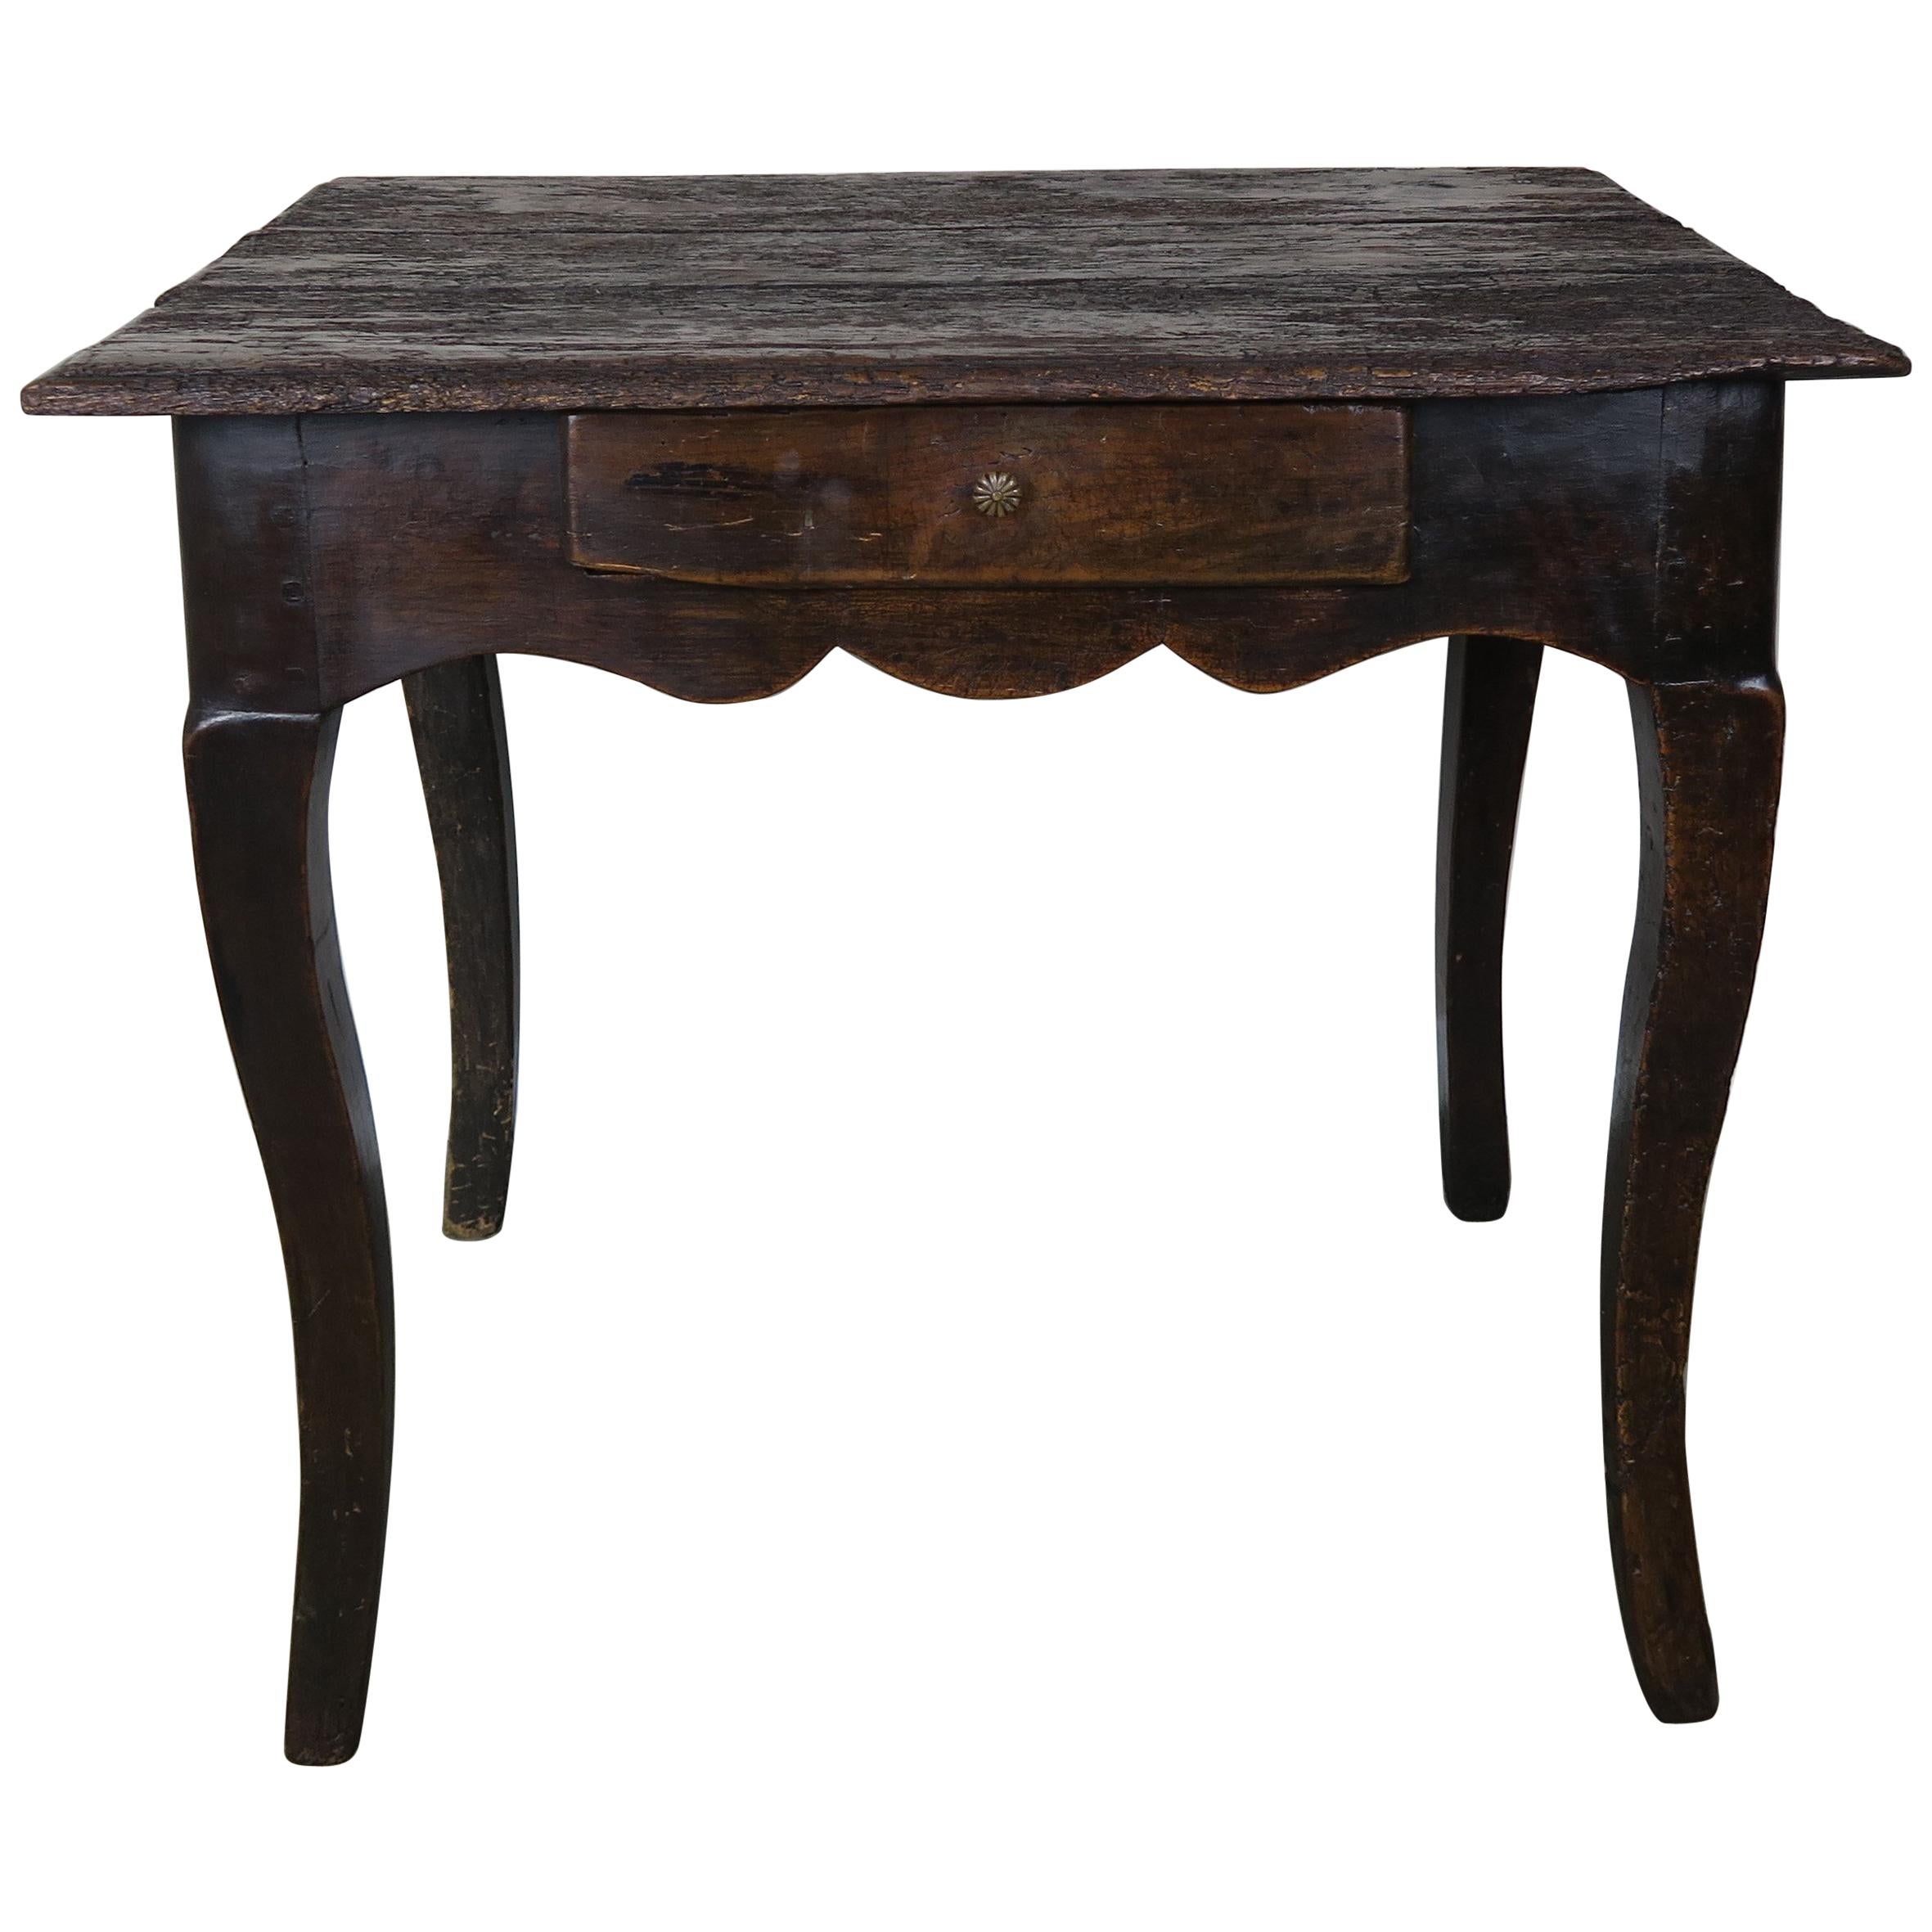 18th Century French Provincial Style Table with Drawer